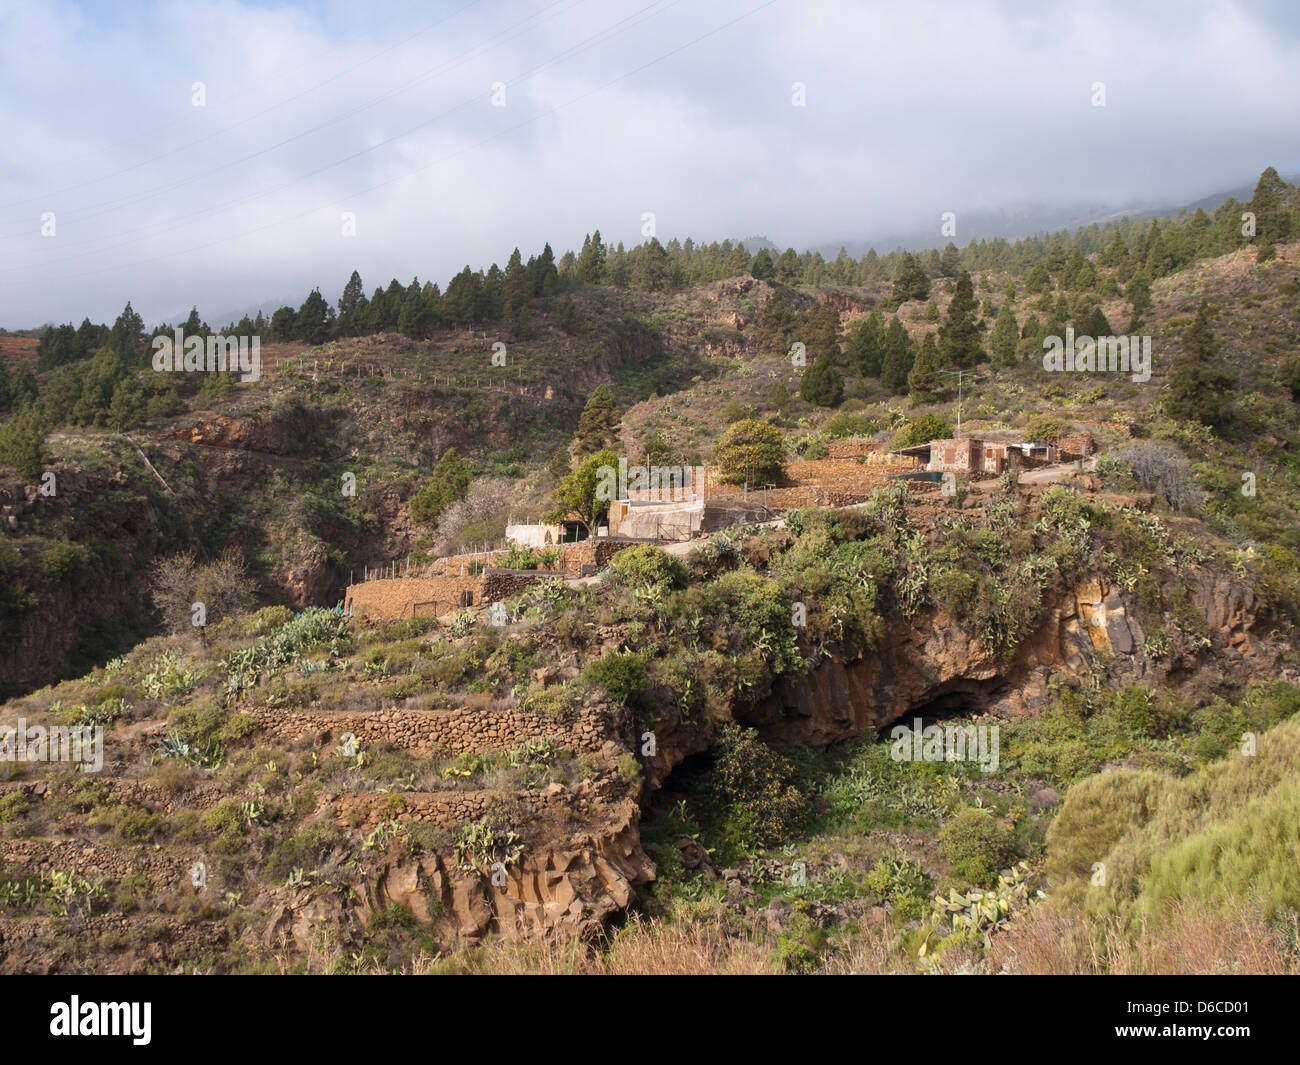 Farm houses and forest in Araya, Tenerife Spain near the footpath to Los Brezos in the Corona Forestal natural park Stock Photo